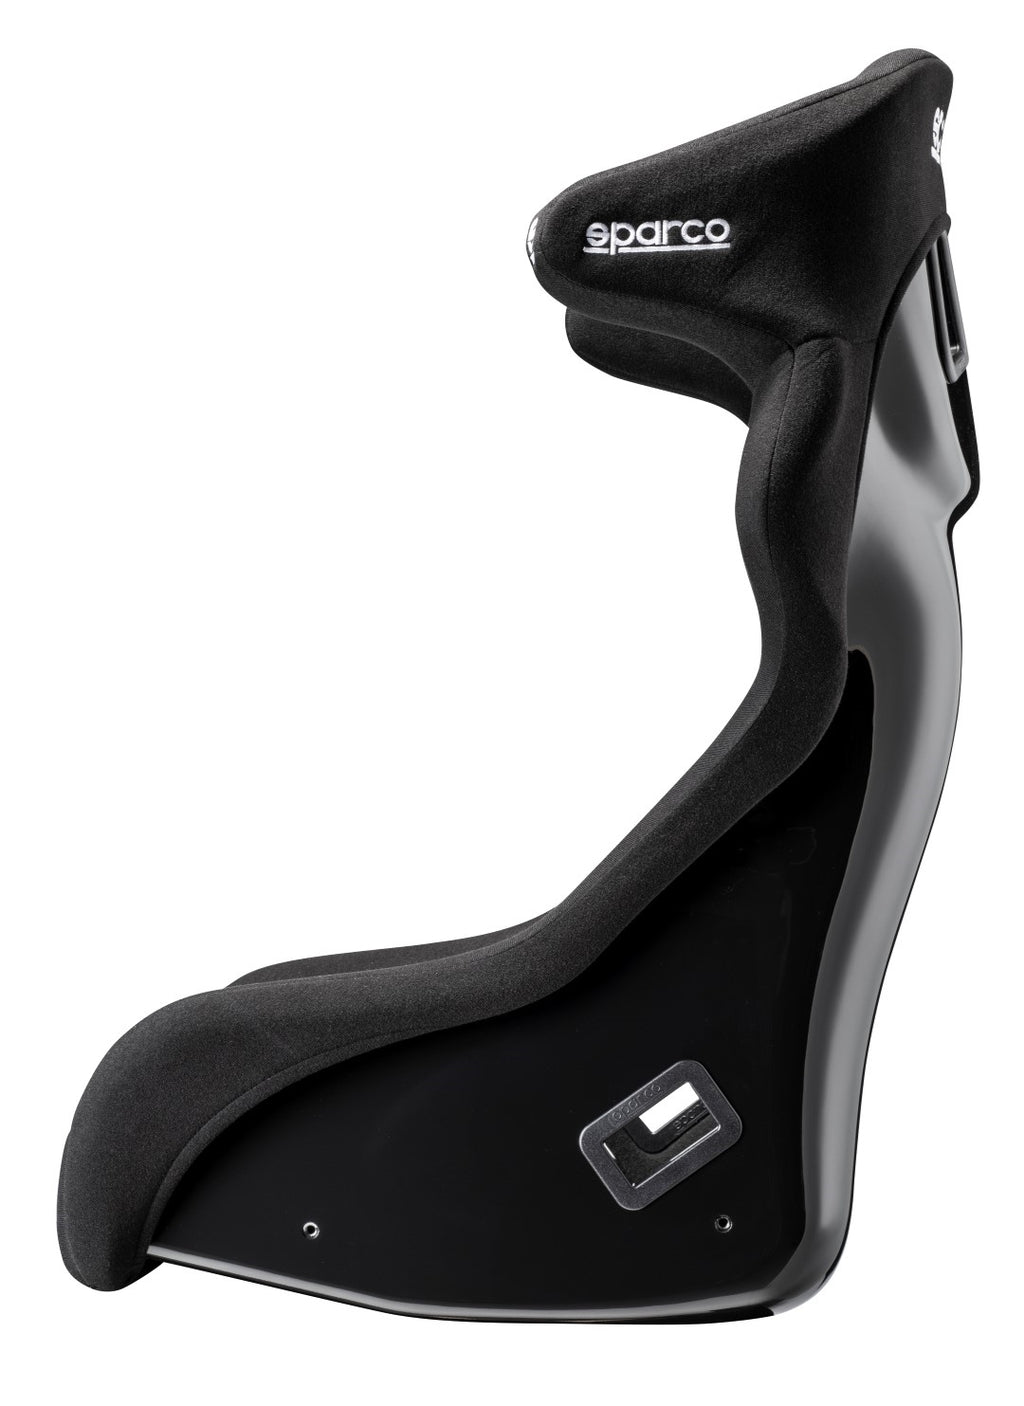 Sparco - Circuit II QRT Competition Seat